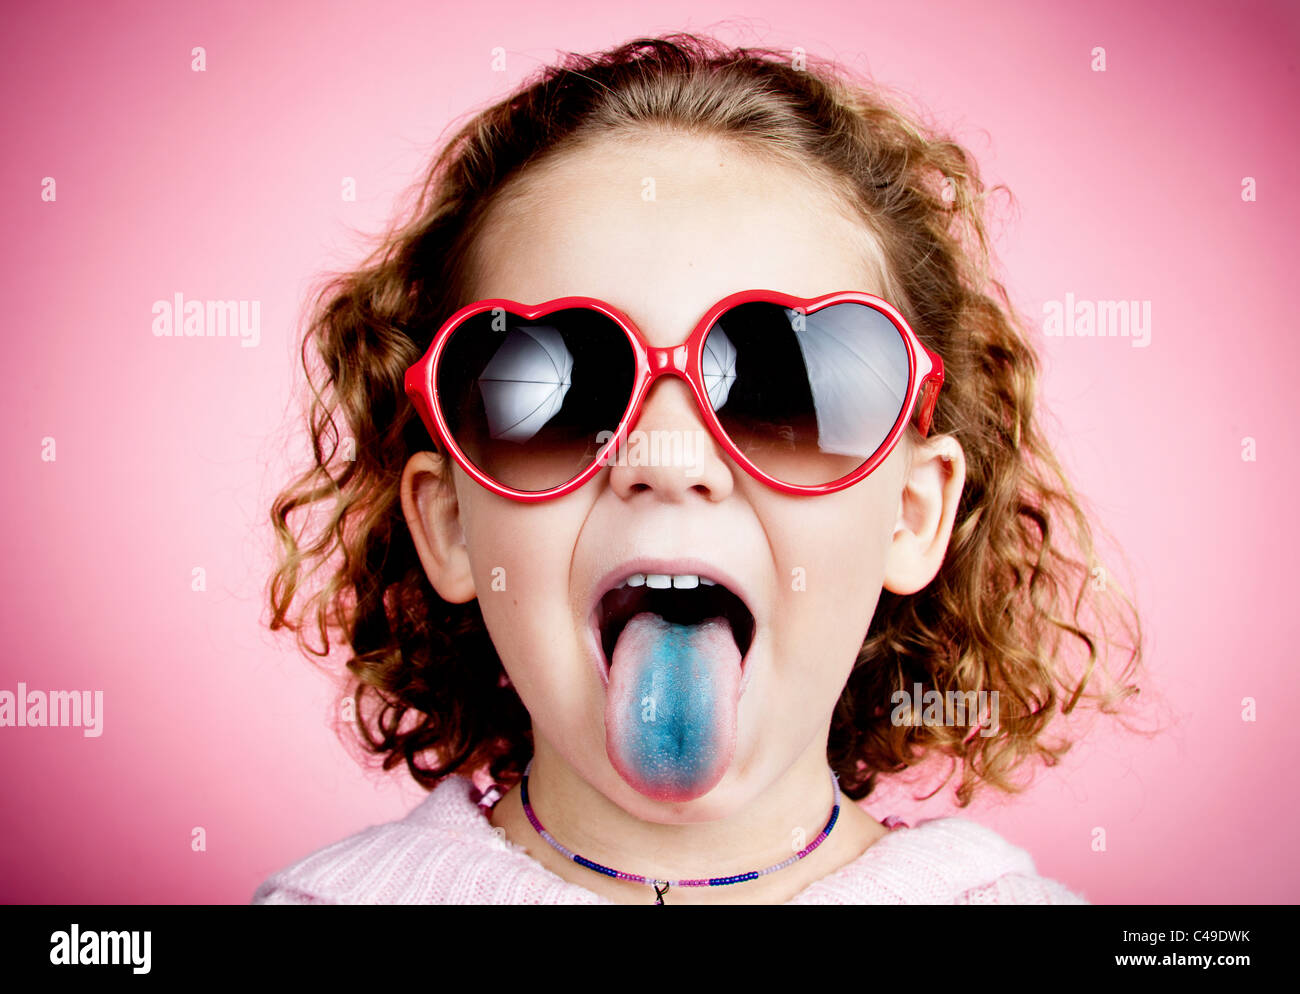 A young girl with curly hair on a pink studio wall wearing heart-shaped sunglasses and sticking out a stained blue tongue Stock Photo